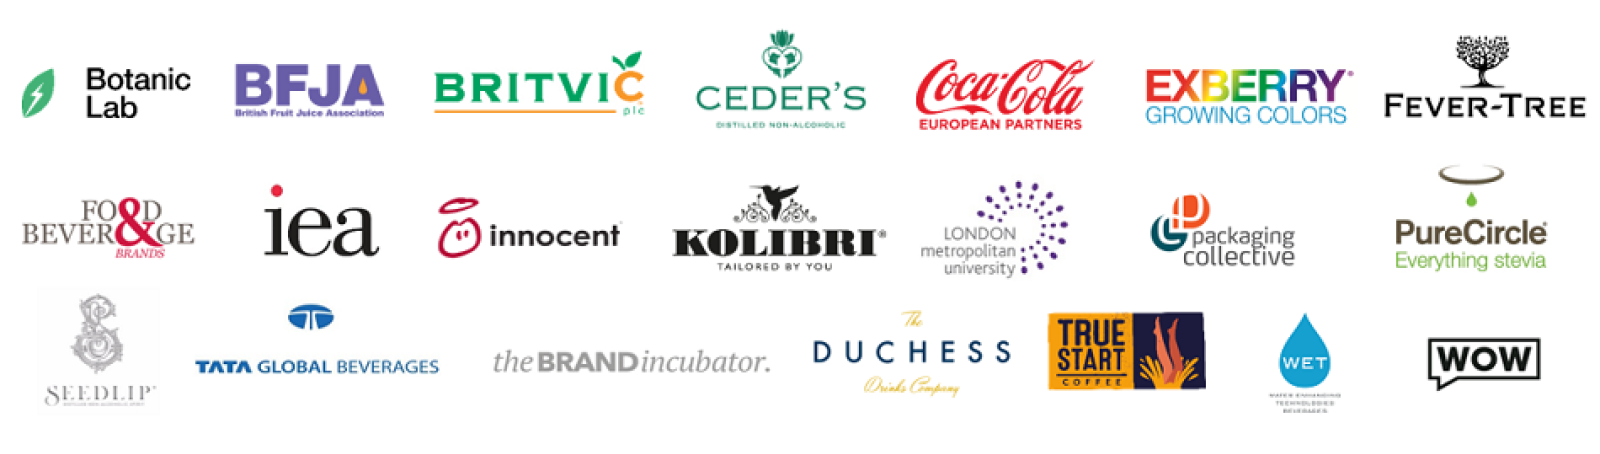 2019 UK Soft Drinks Conference Logo Wall